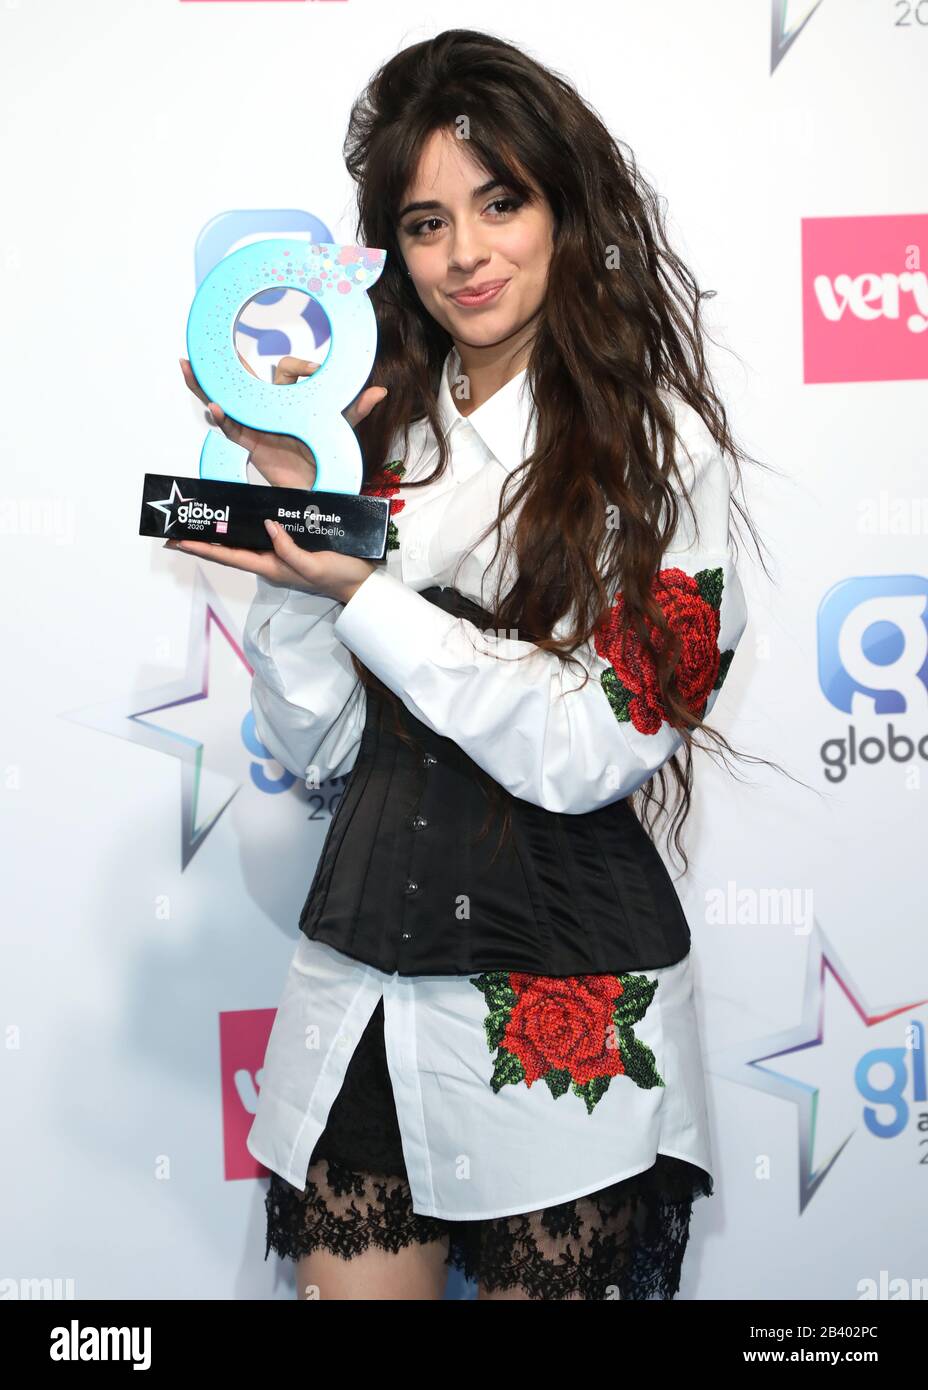 Camila Cabello wins Best Female at The Global Awards 2020 with Very.co.uk at London's Eventim Apollo Hammersmith. Stock Photo